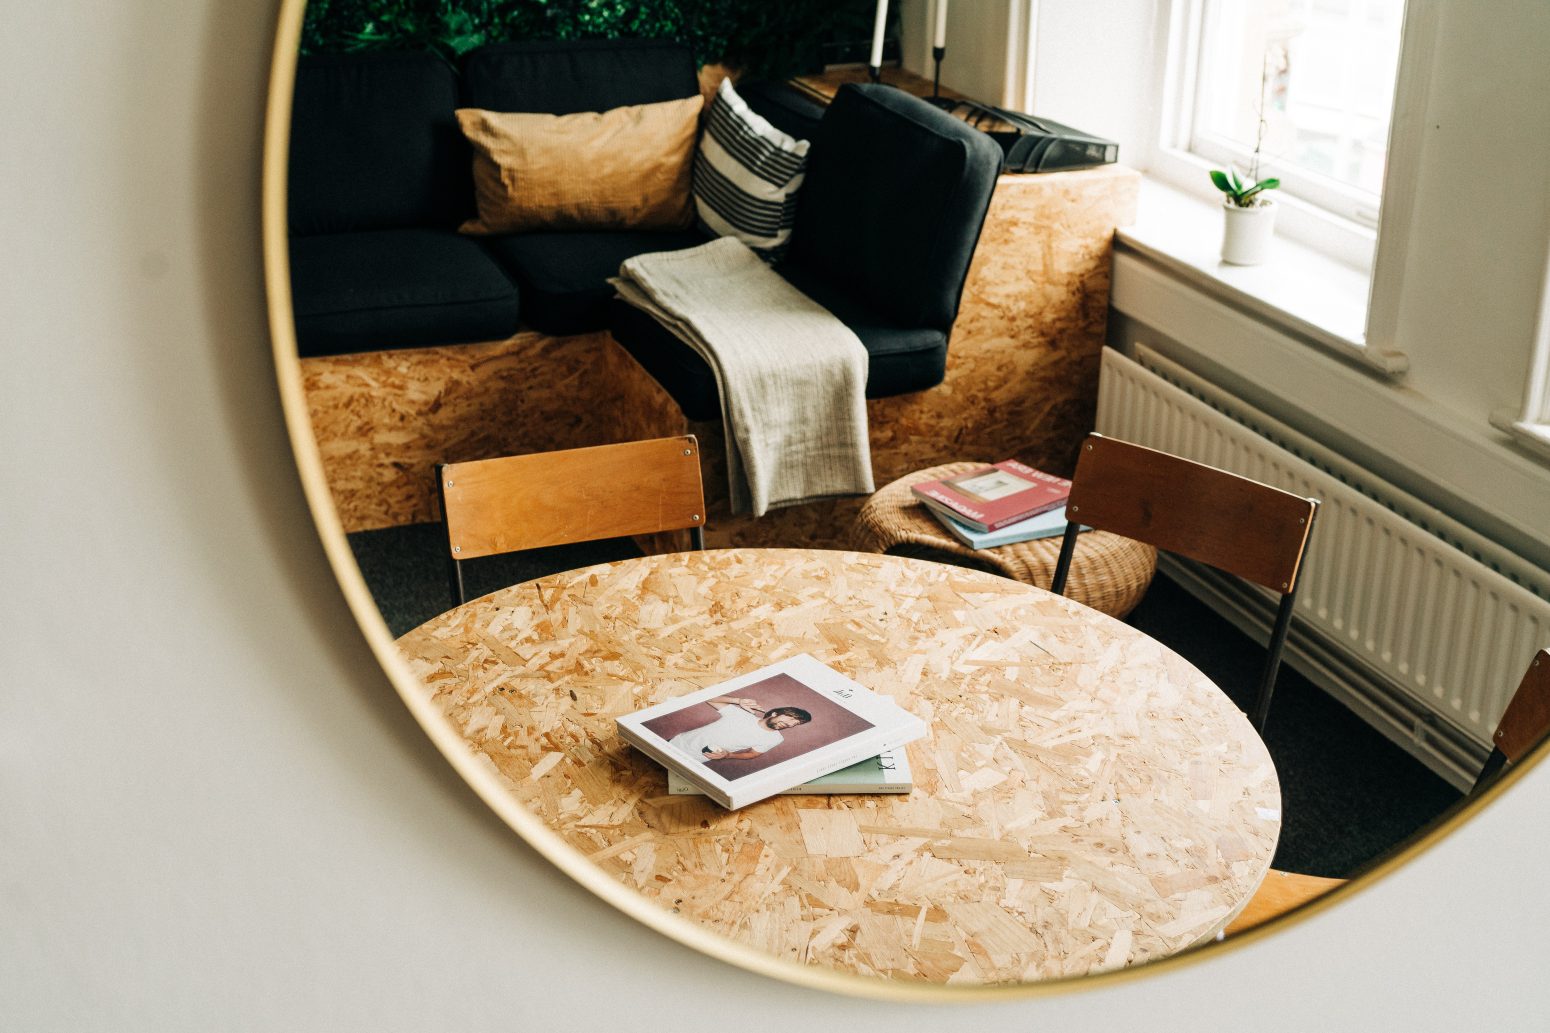 A cozy reading nook with a black sofa, wooden chairs, and a round chipboard table featuring a book on website design with a person on the cover, all reflected in a large circular mirror.